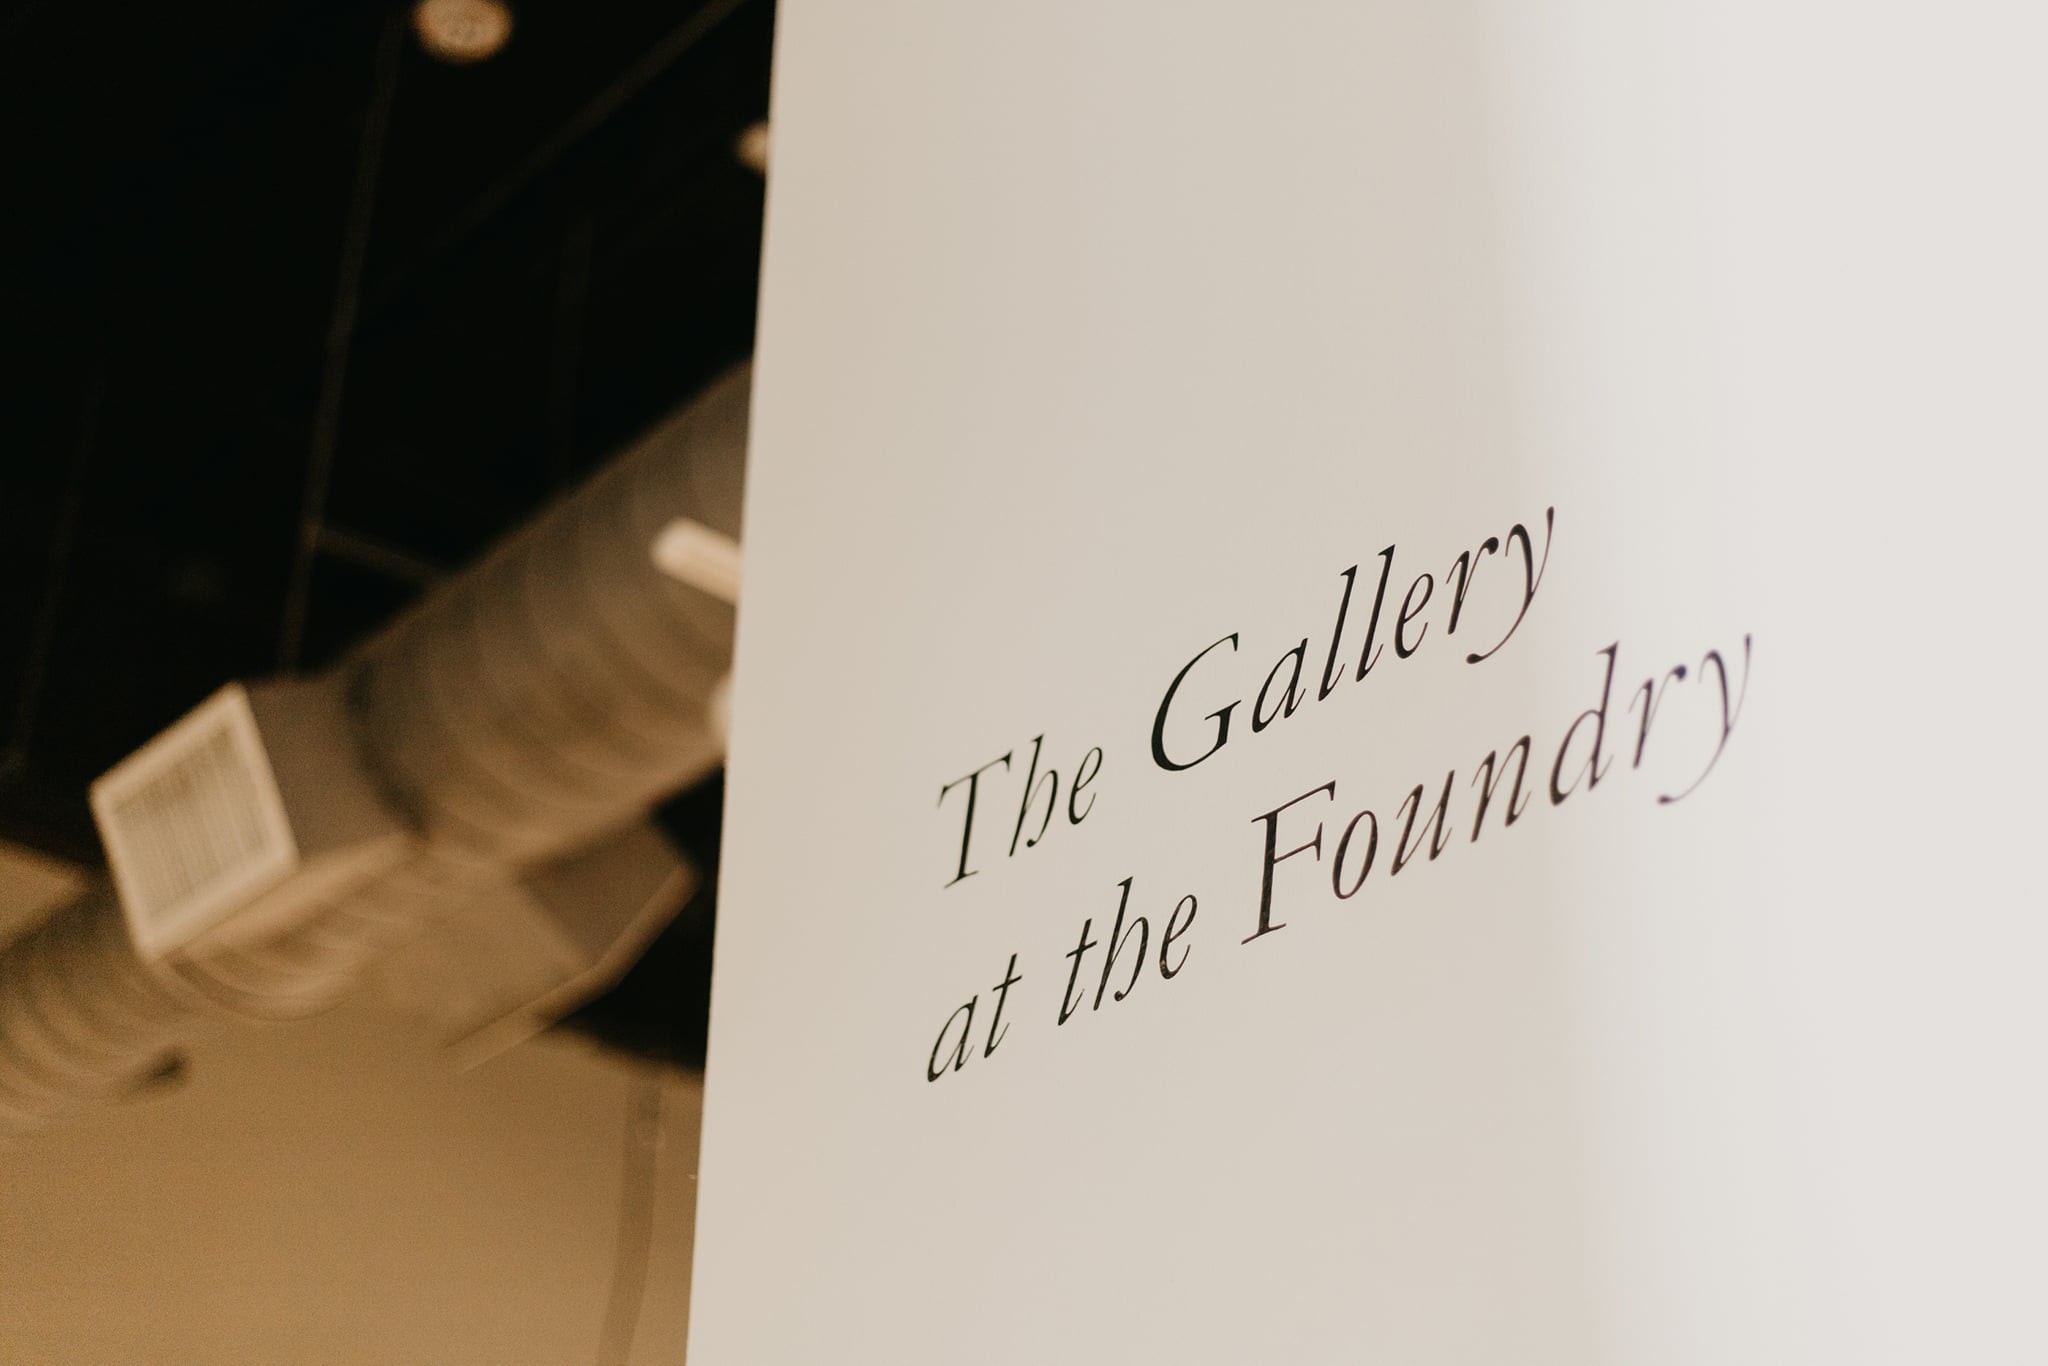 The Gallery at The Foundry